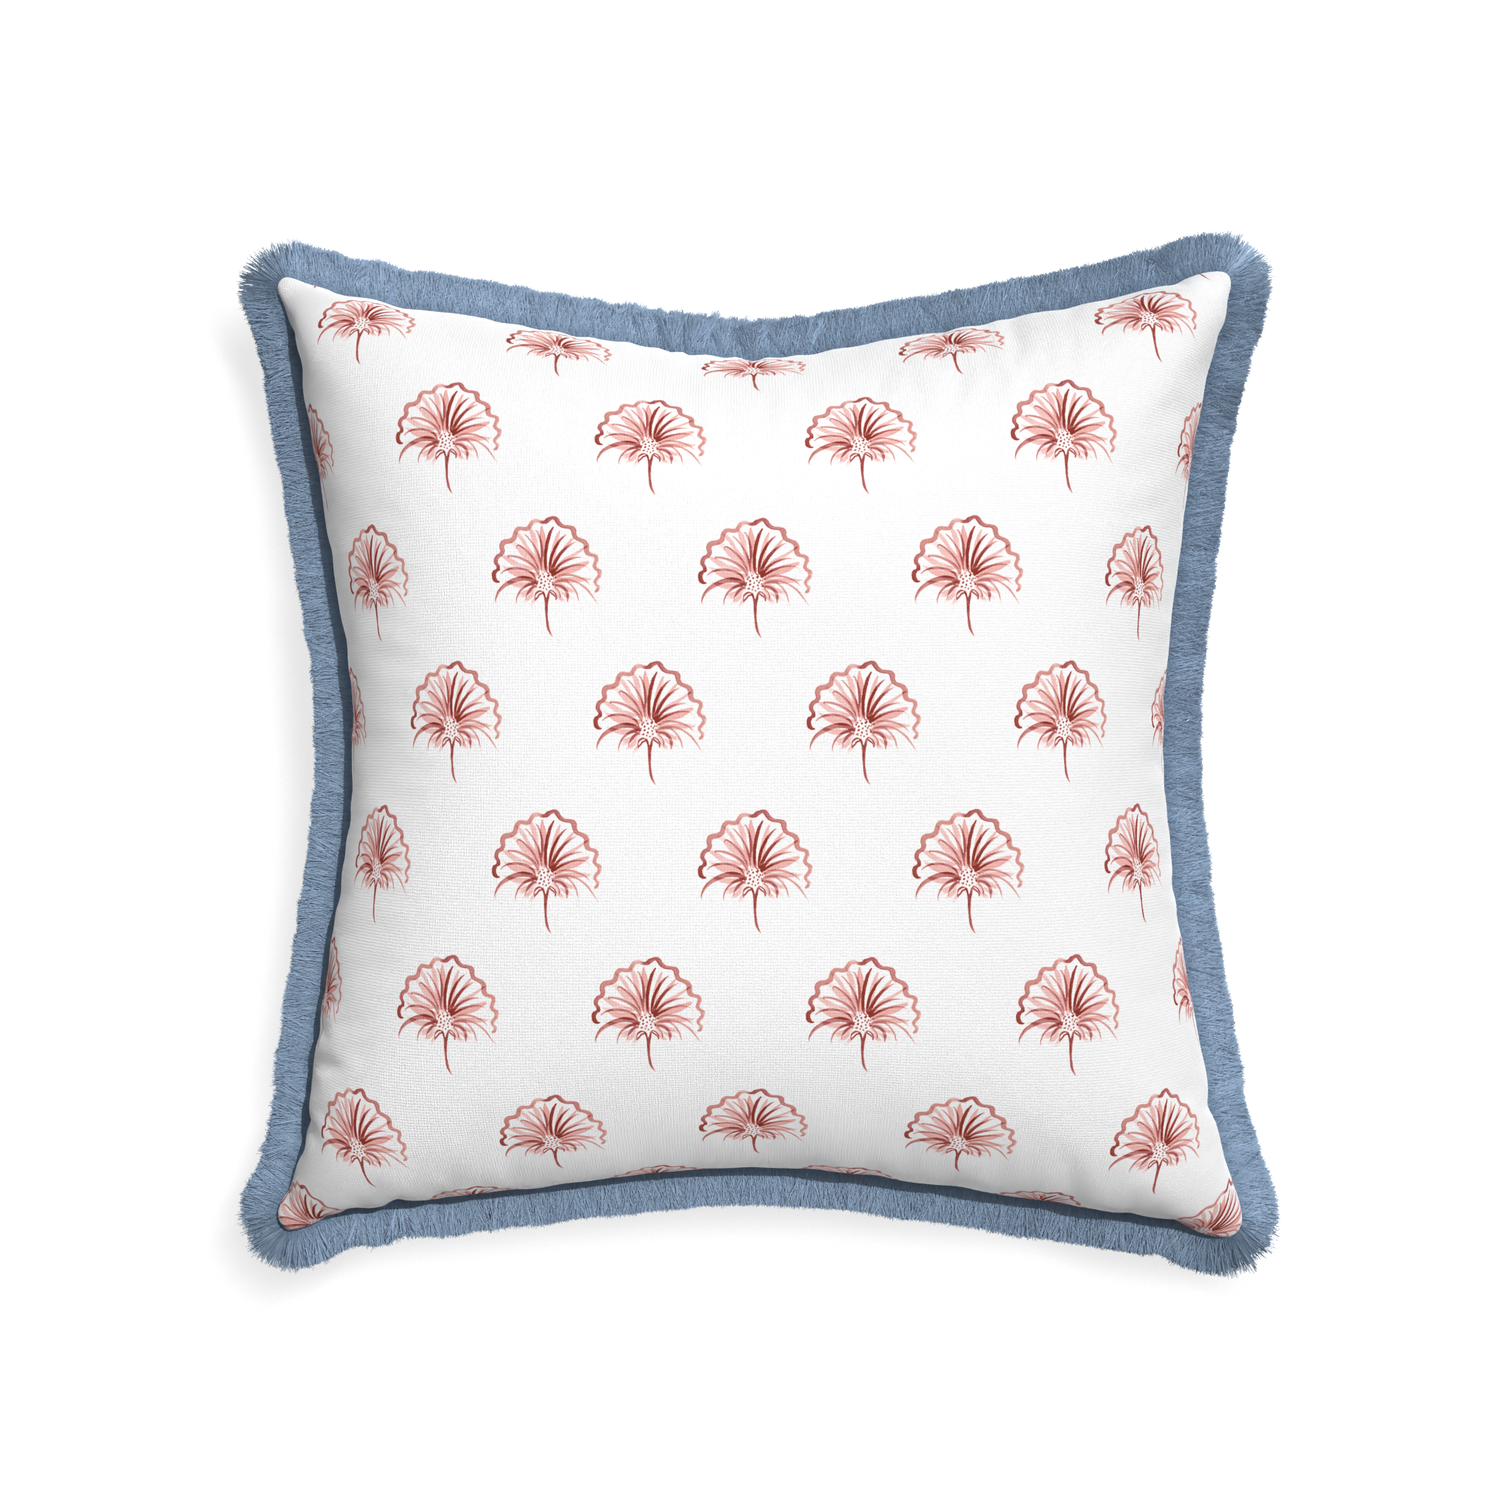 22-square penelope rose custom floral pinkpillow with sky fringe on white background